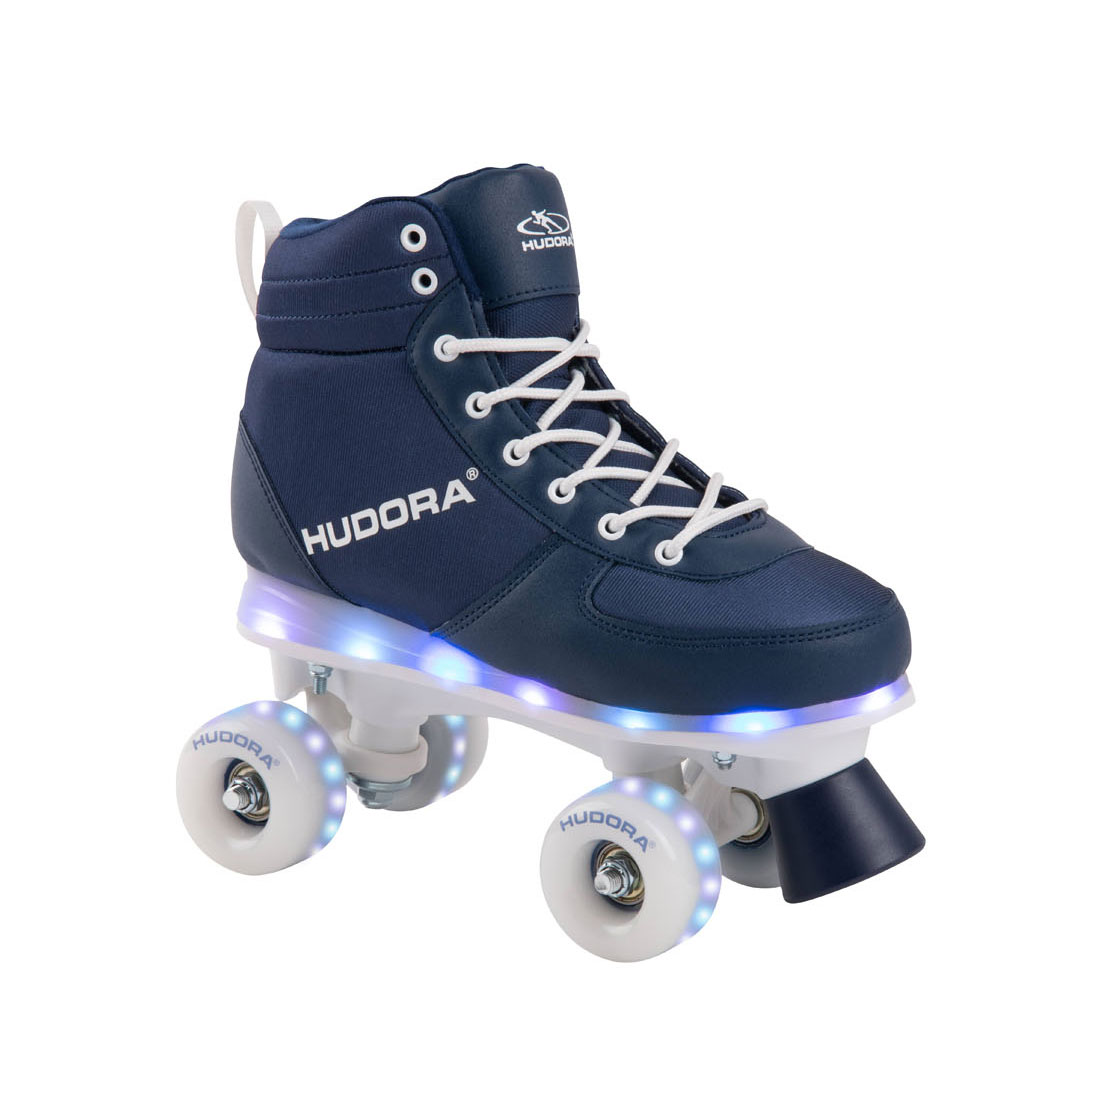 Roller skates Blue with LED, size 33-34 | Thimble Toys